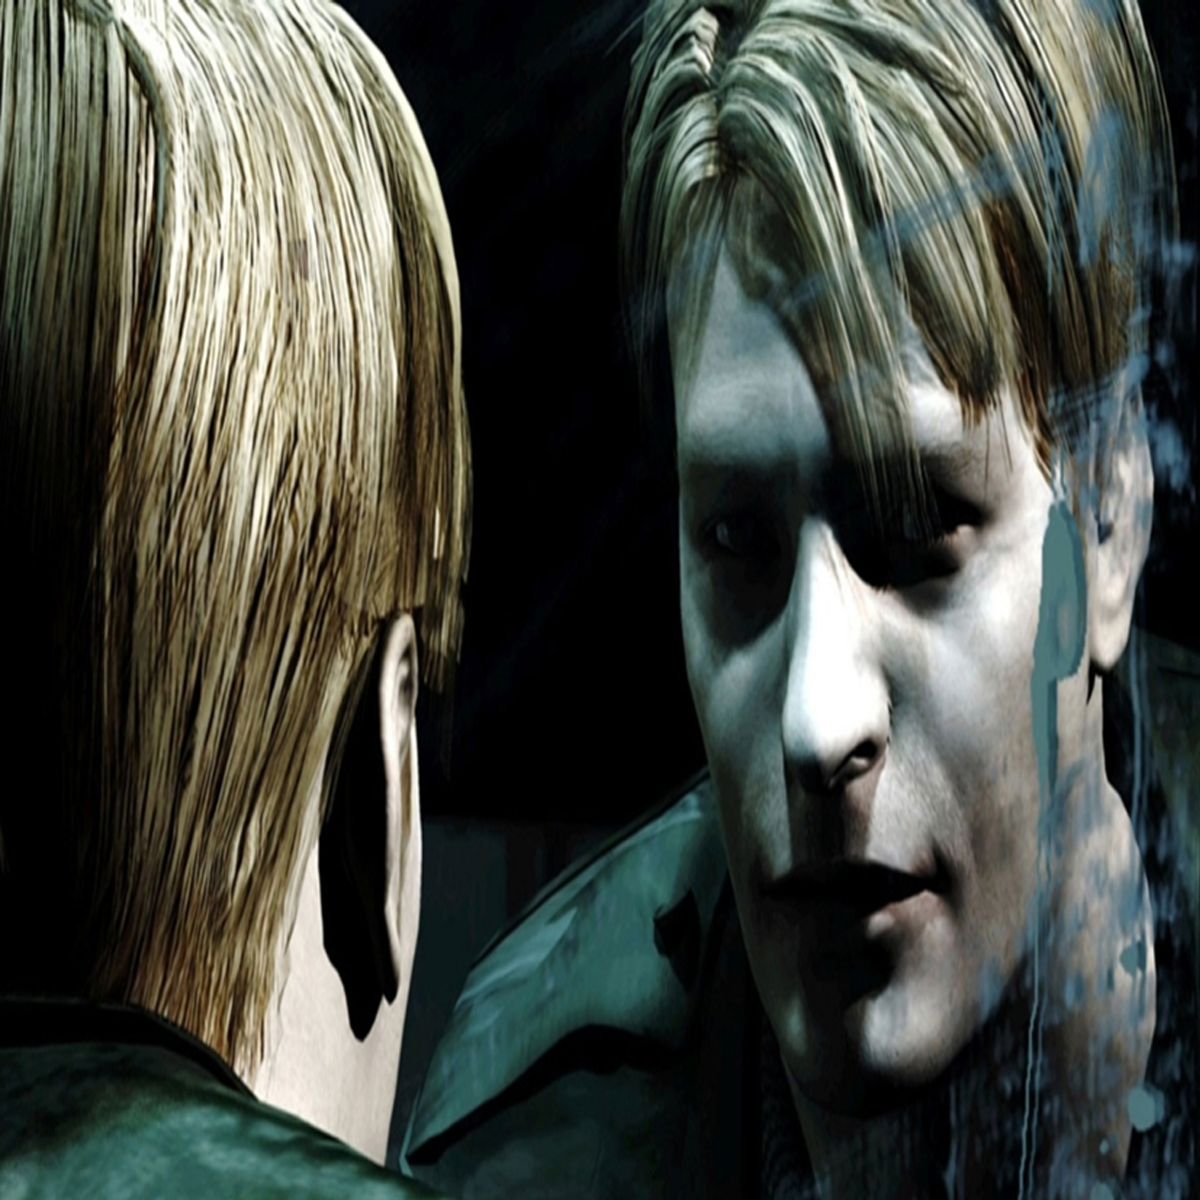 Silent Hill 2 remake is rumoured to be revealed soon